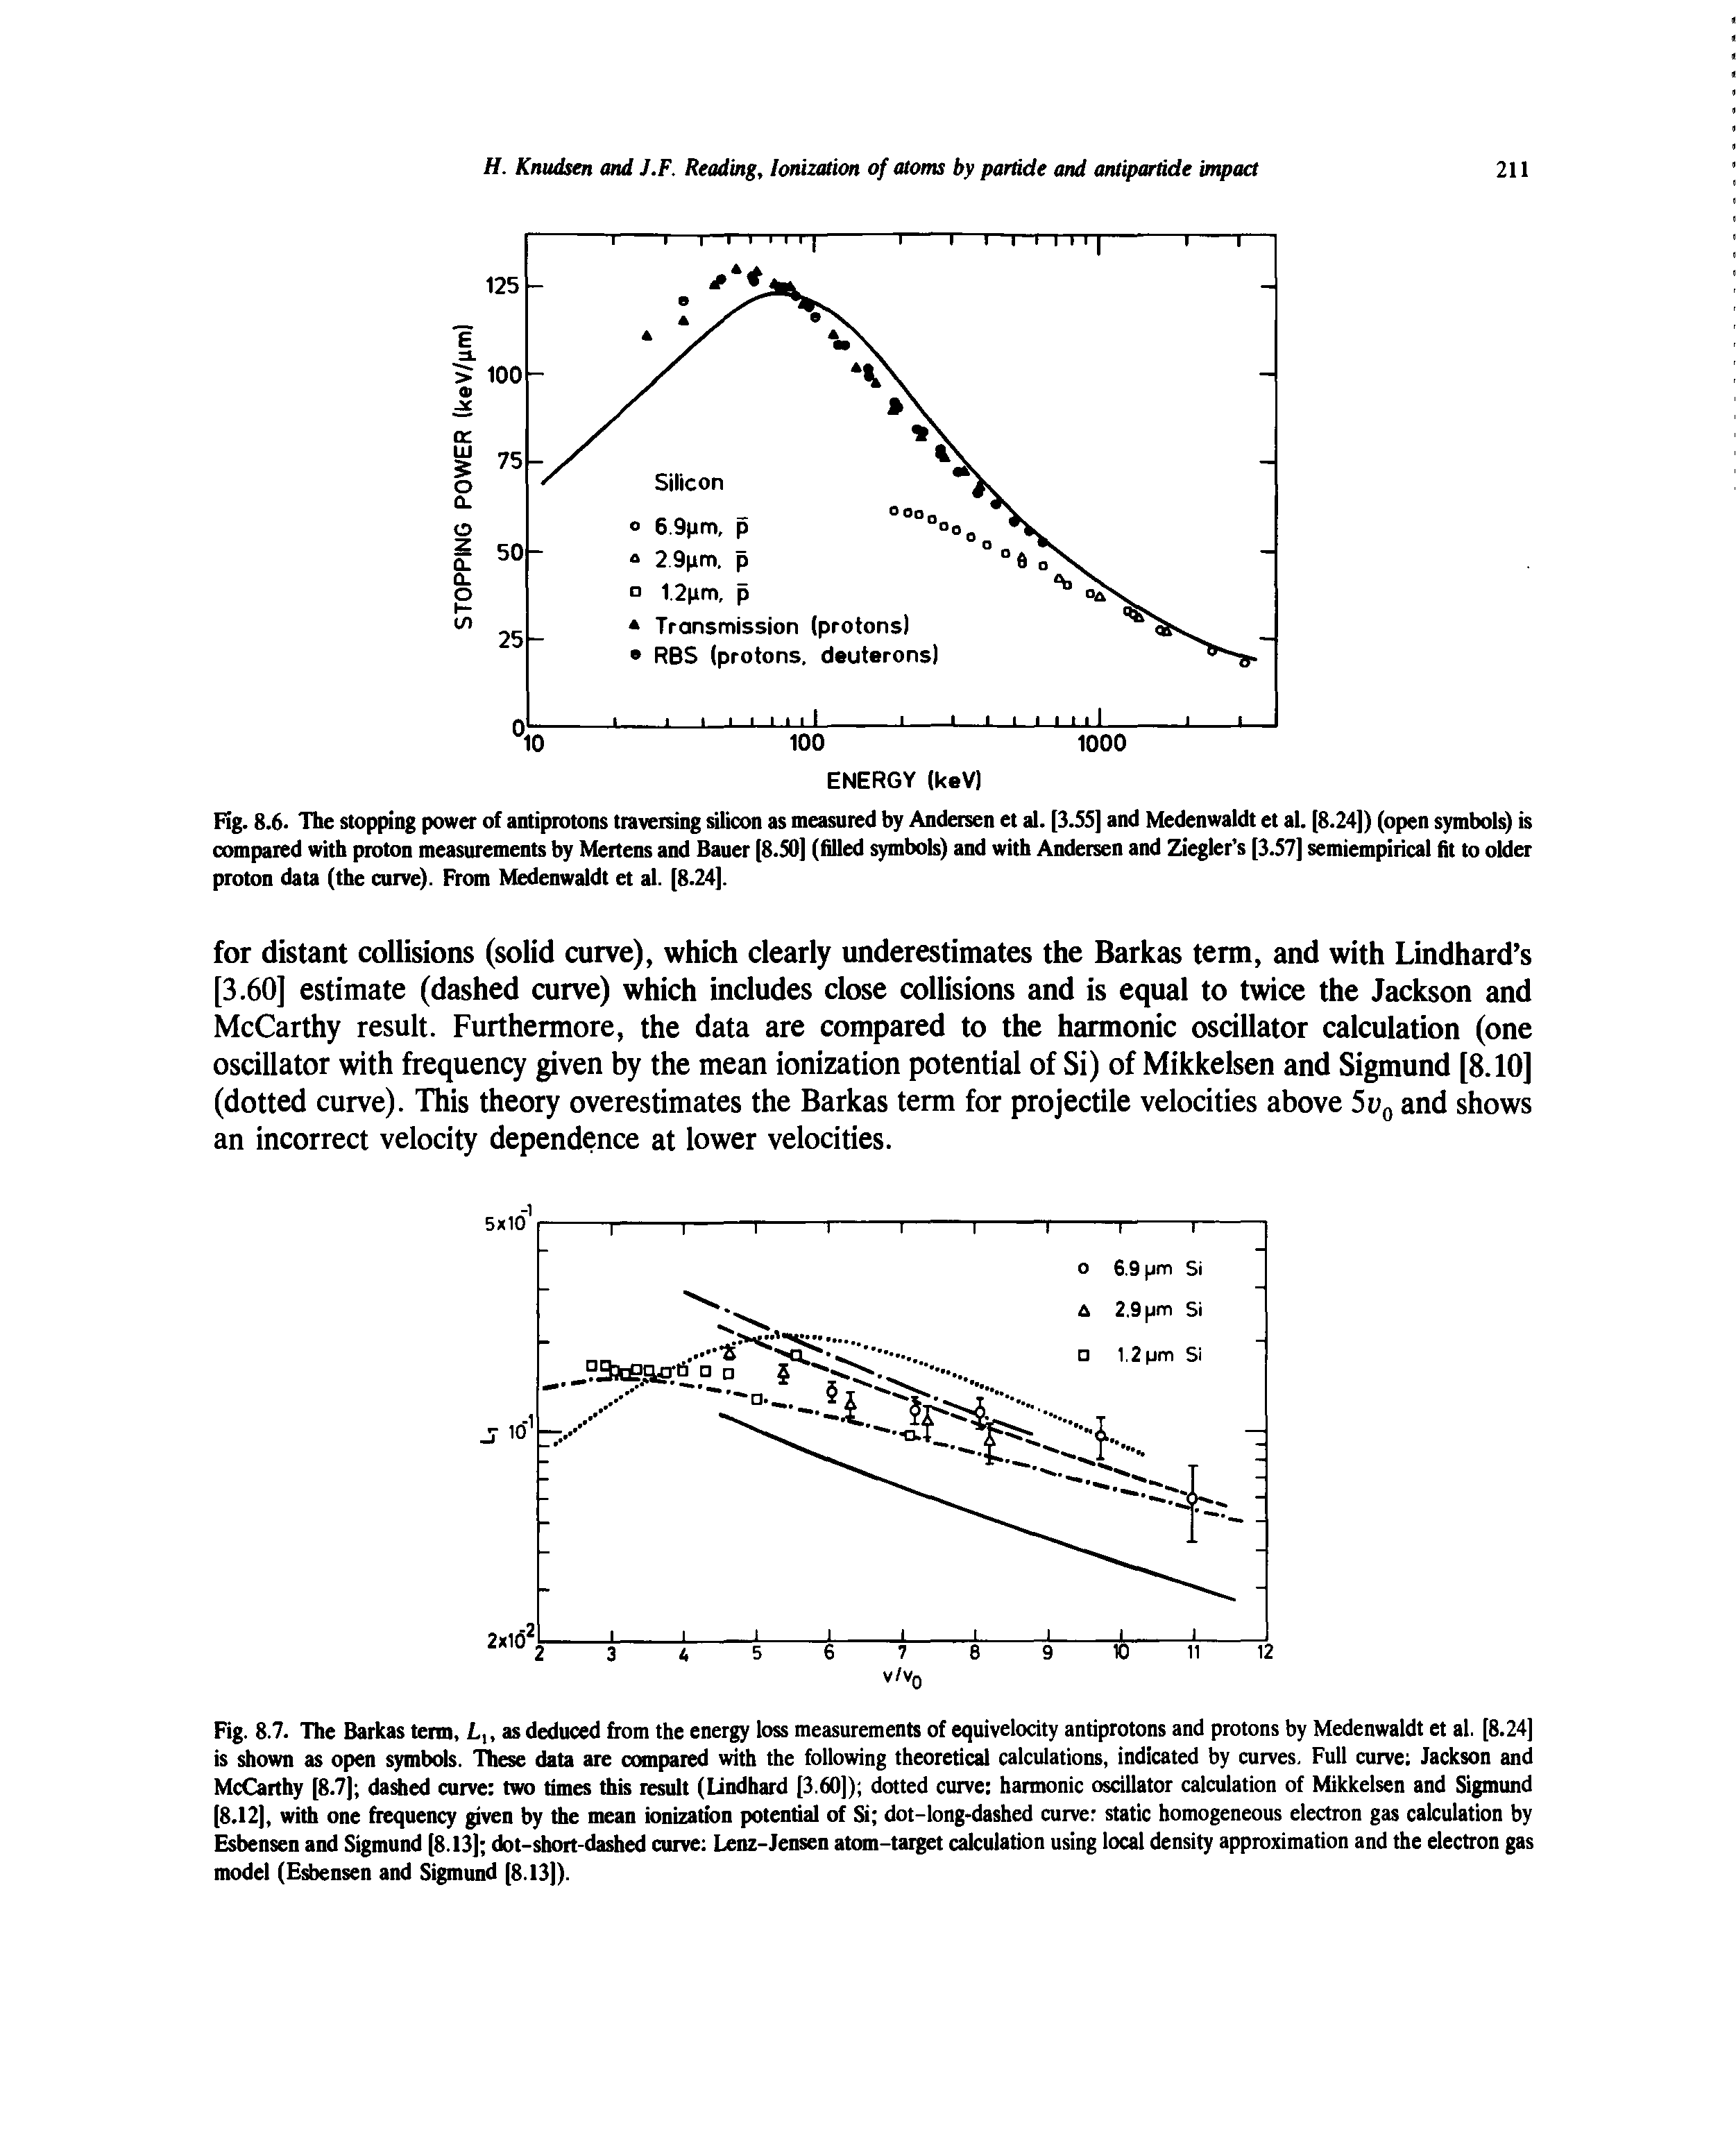 Fig. 8.7. The Barkas term, L, as deduced from the energy loss measurements of equivelocity antiprotons and protons by Medenwaldt et al. [8.24] is shown as open symbois. These data are compared with the following theoretical calculations, indicated by curves. Full curve Jackson and McCarthy [8.7] dashed curve two times this result (Lindhard [3.60]) dotted curve harmonic oscillator calculation of Mikkelsen and Sigmund [8.12], with one frequency given by the mean ionization potential of Si dot-long-dashed curve static homogeneous electron gas calculation by Esbensen and Sigmund [8.13] dot-short-dashed curve Lenz-Jensen atom-target calculation using local density approximation and the electron gas model (Esbensen and Sigmund [8.13]).